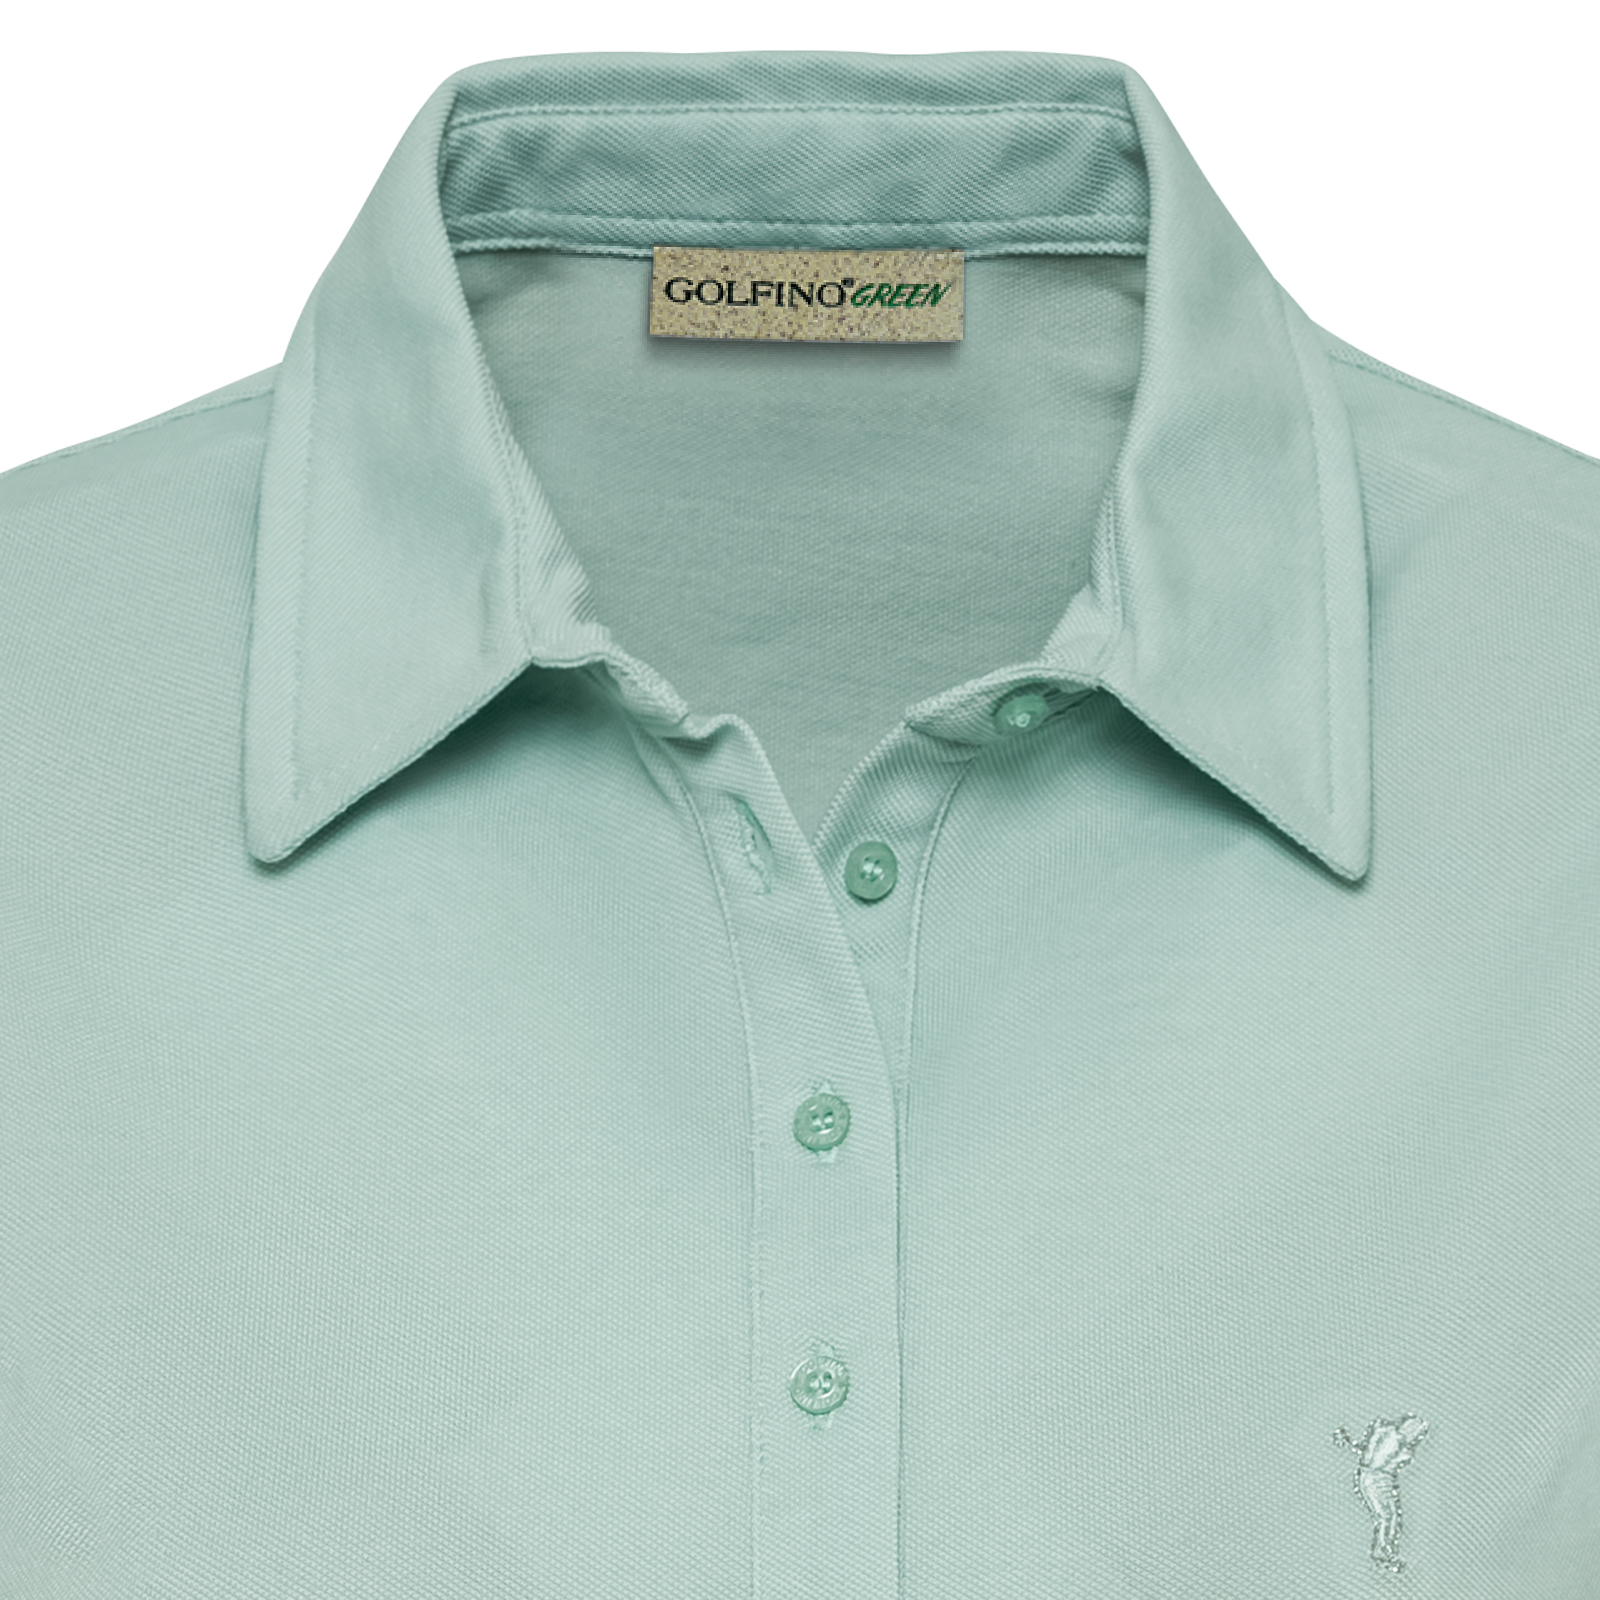 Ladies' golf top made from sustainably produced fabric